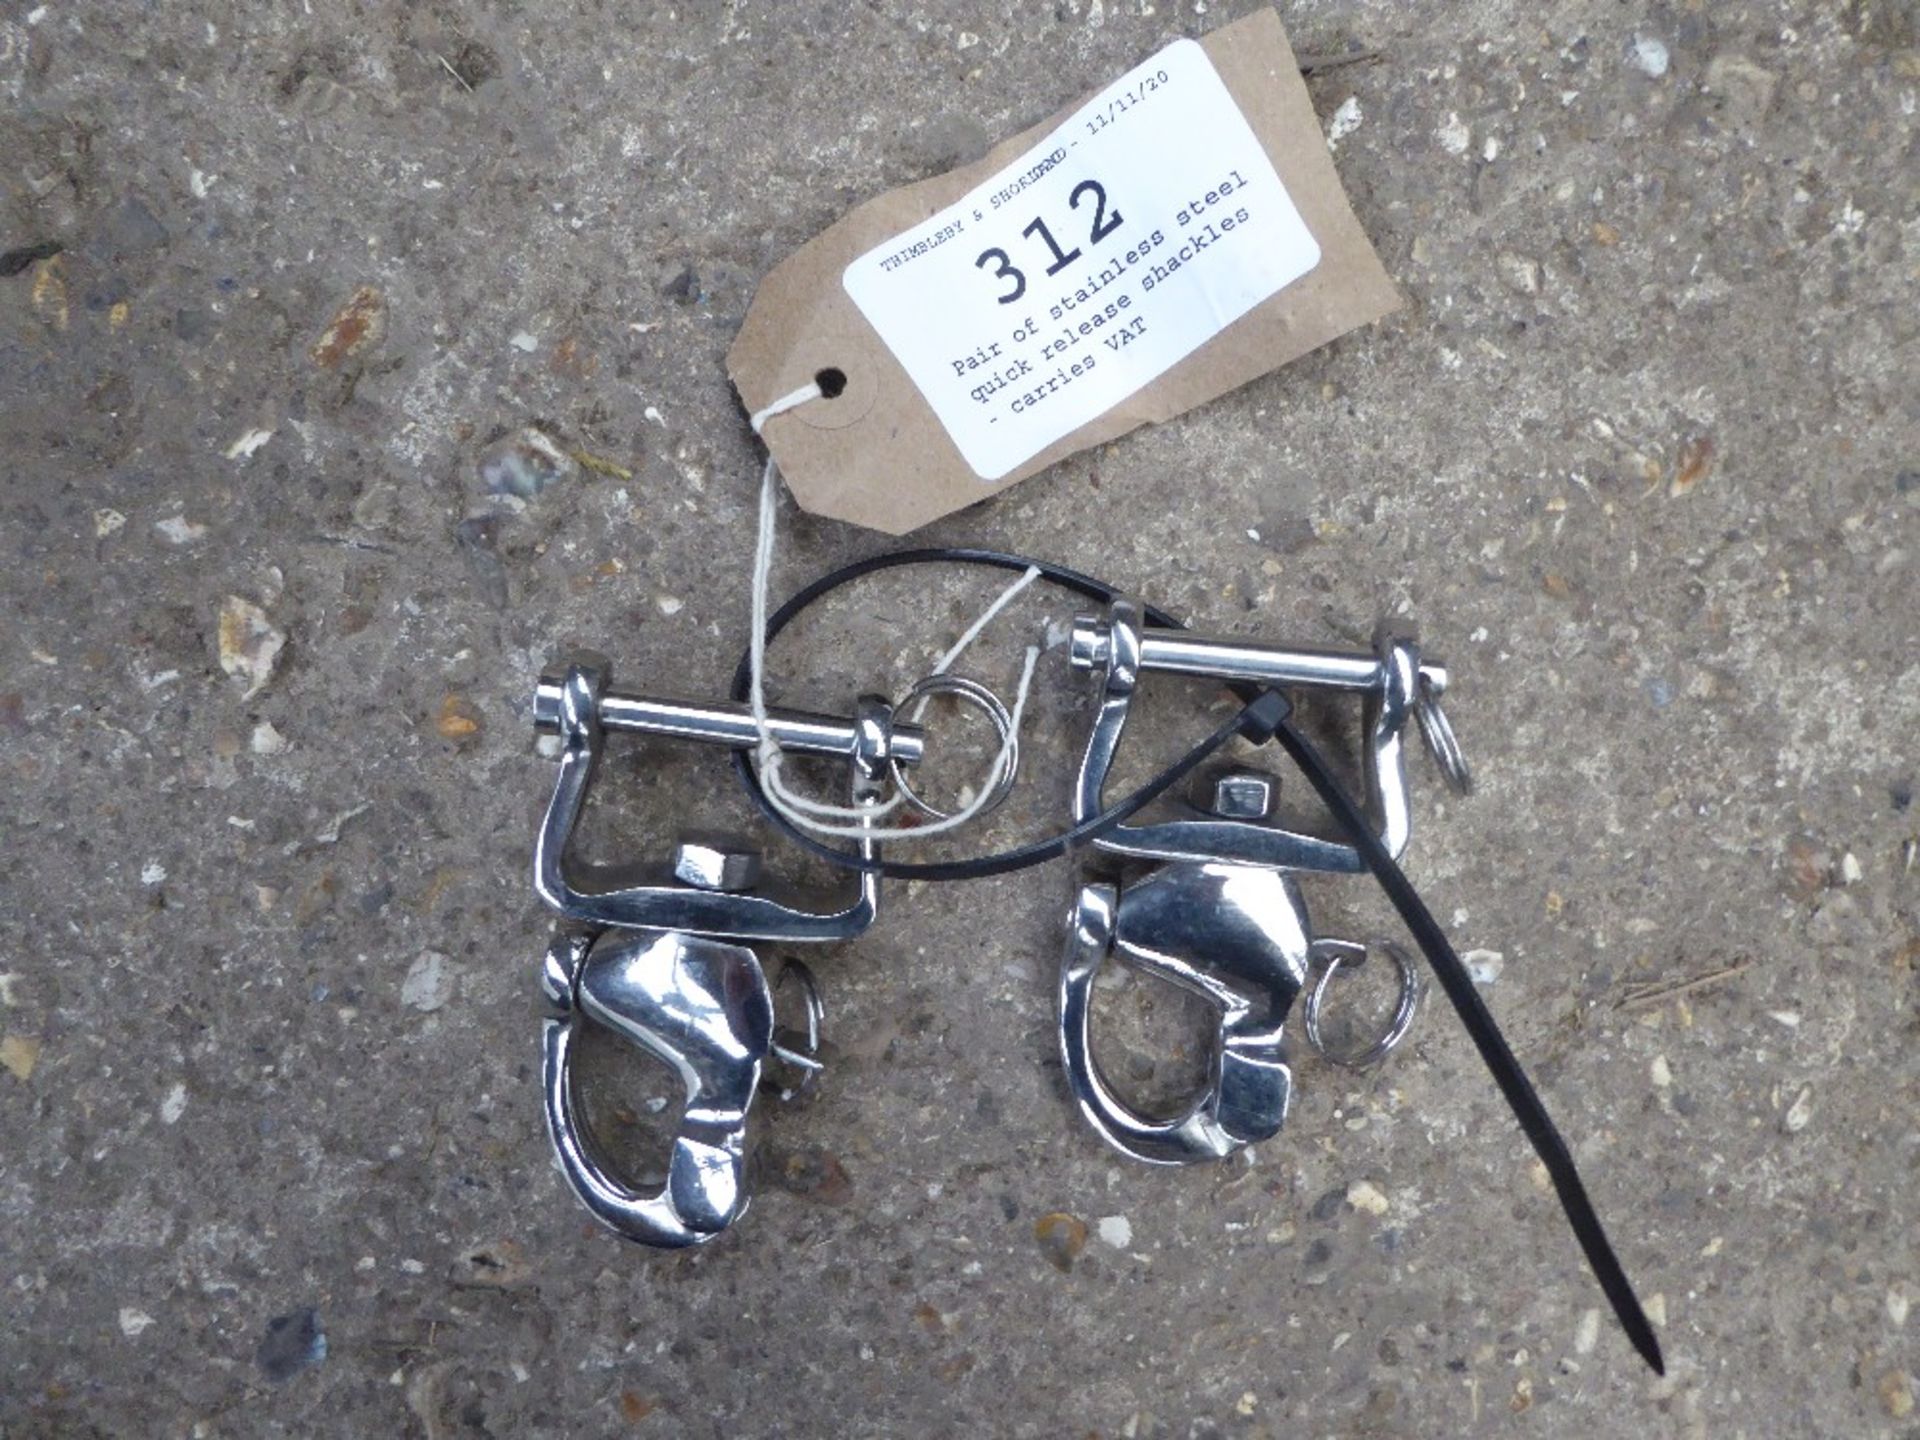 Pair of stainless steel quick release shackles - carries VAT